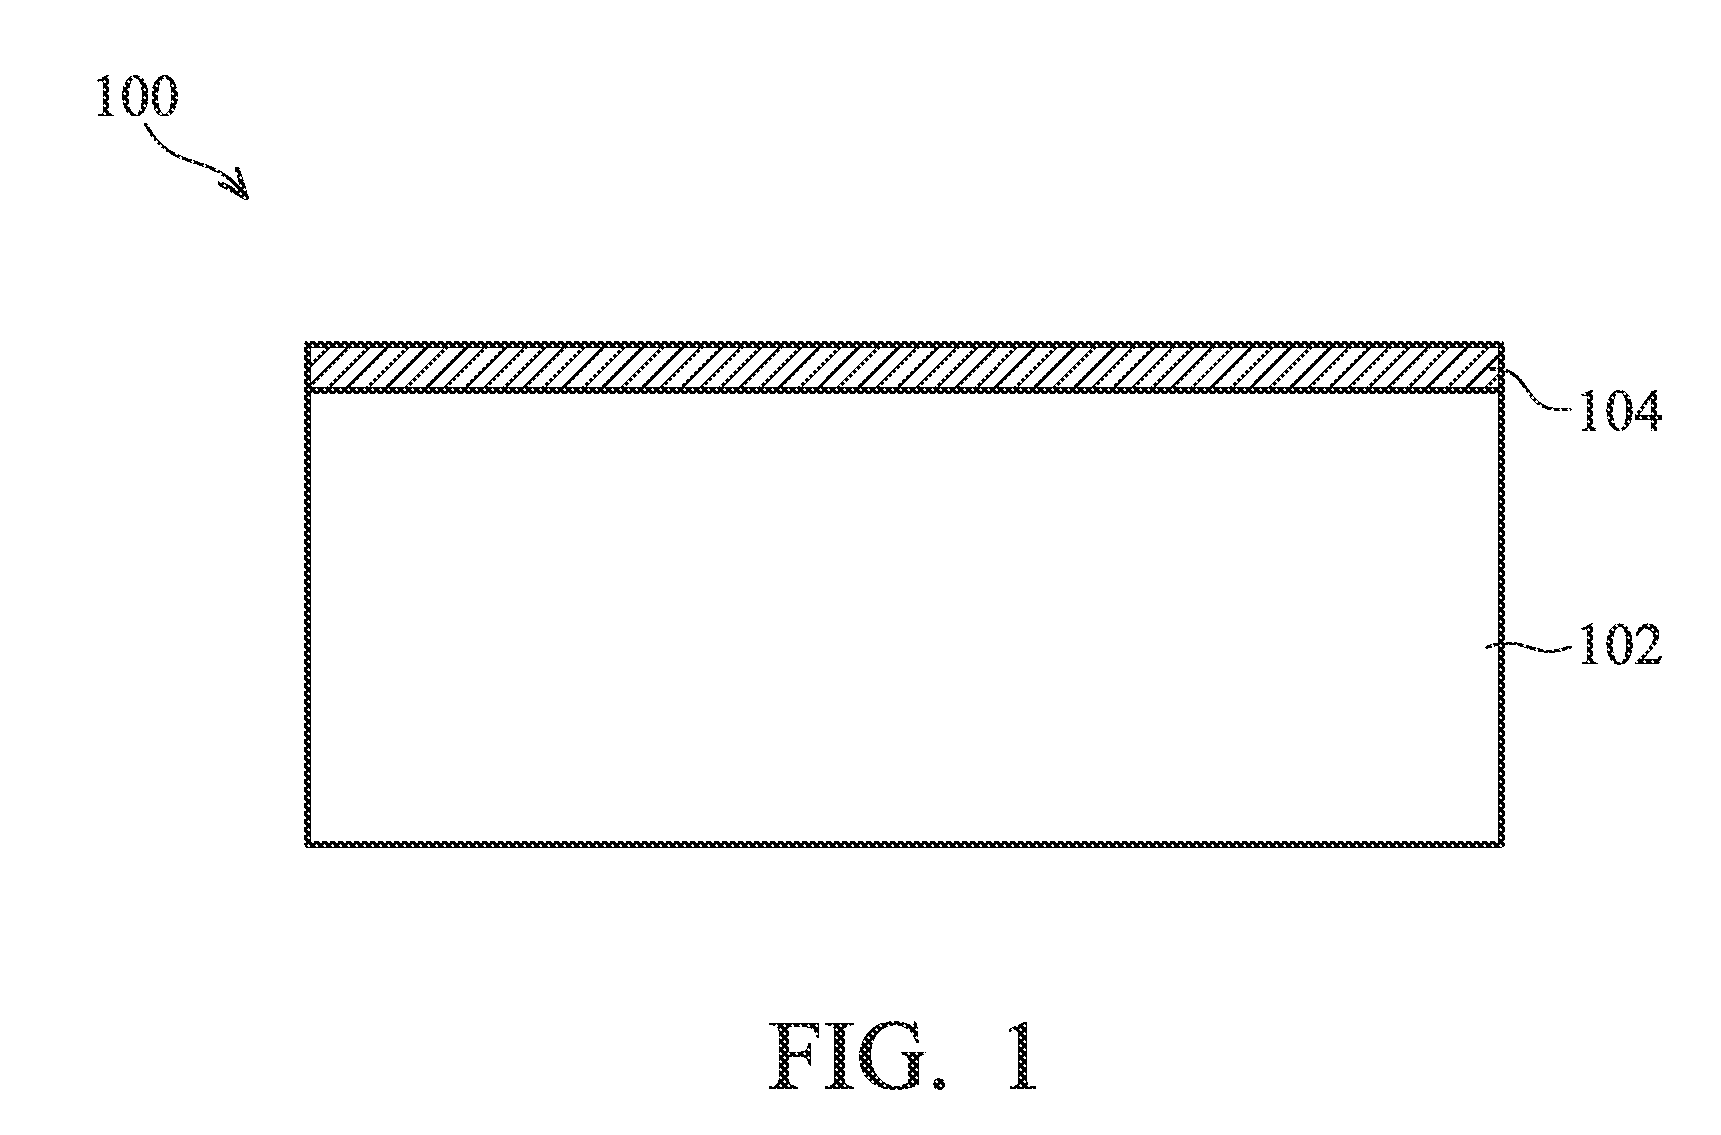 Method of Separating Light-Emitting Diode from a Growth Substrate